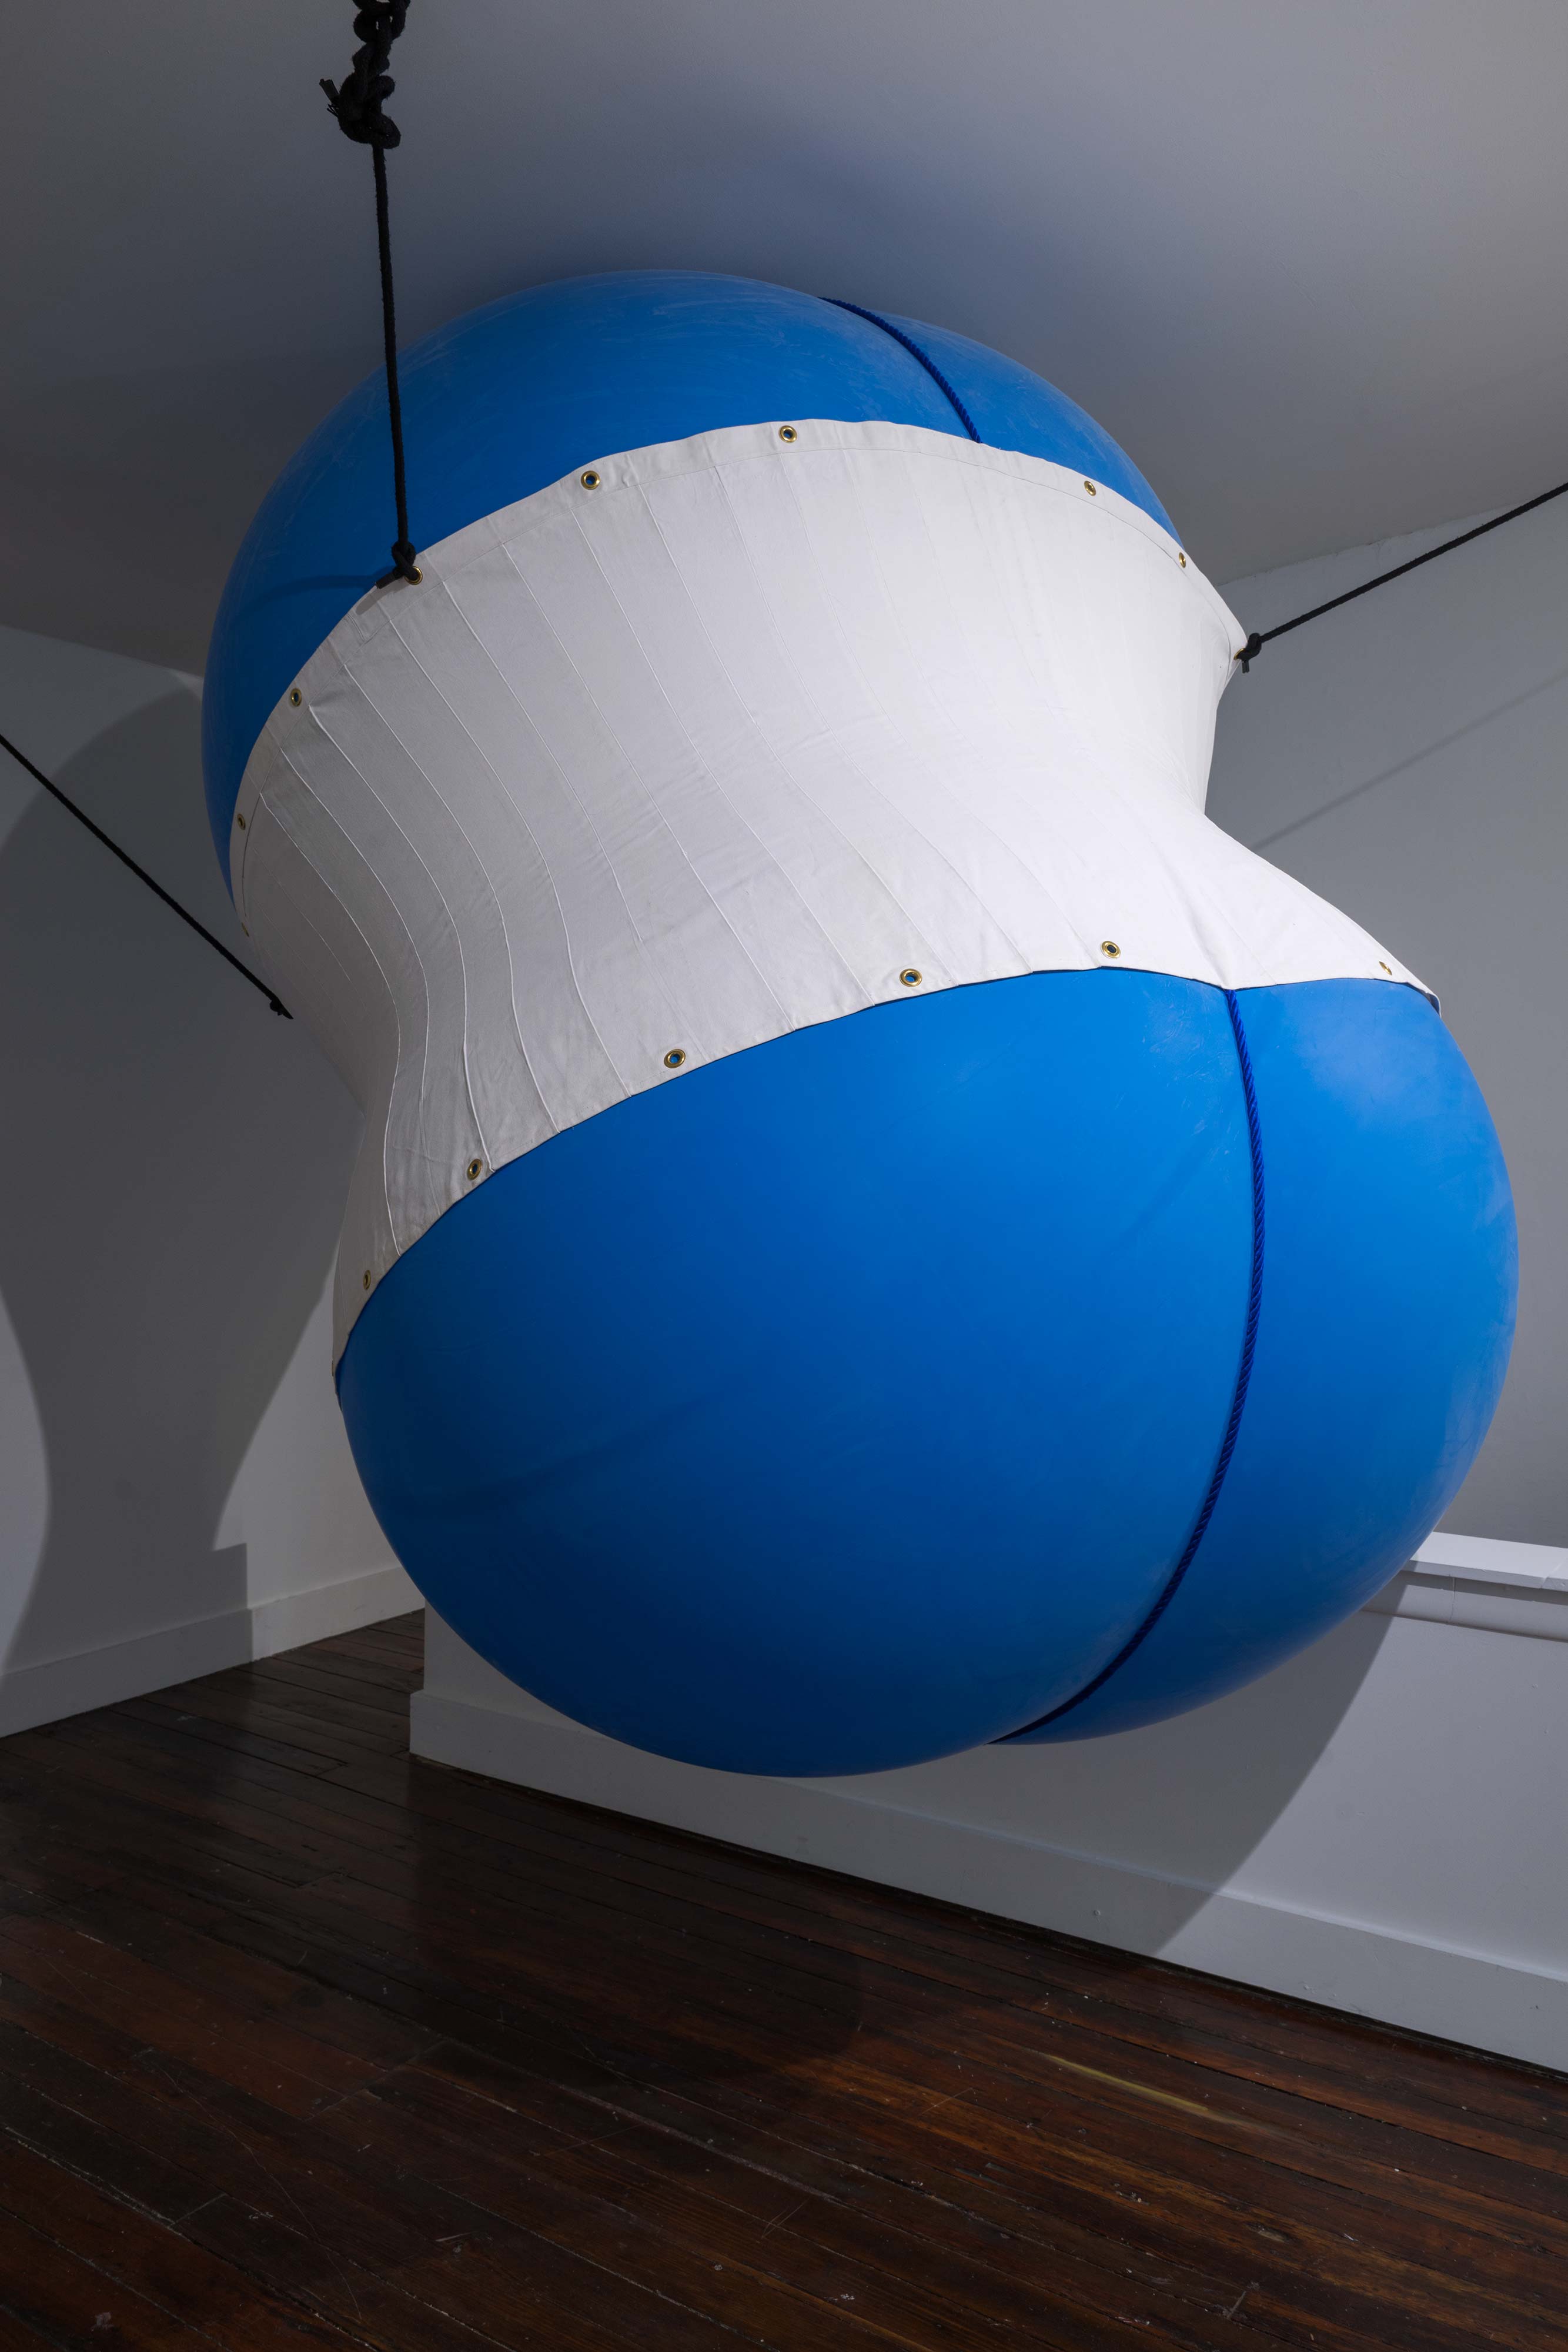 Nancy Davidson<br>Blue Moon<br>1998<br>Latex, rope, cotton<br>76 x 60 x 60 in (193 x 152 x 152 cm),  installation variable